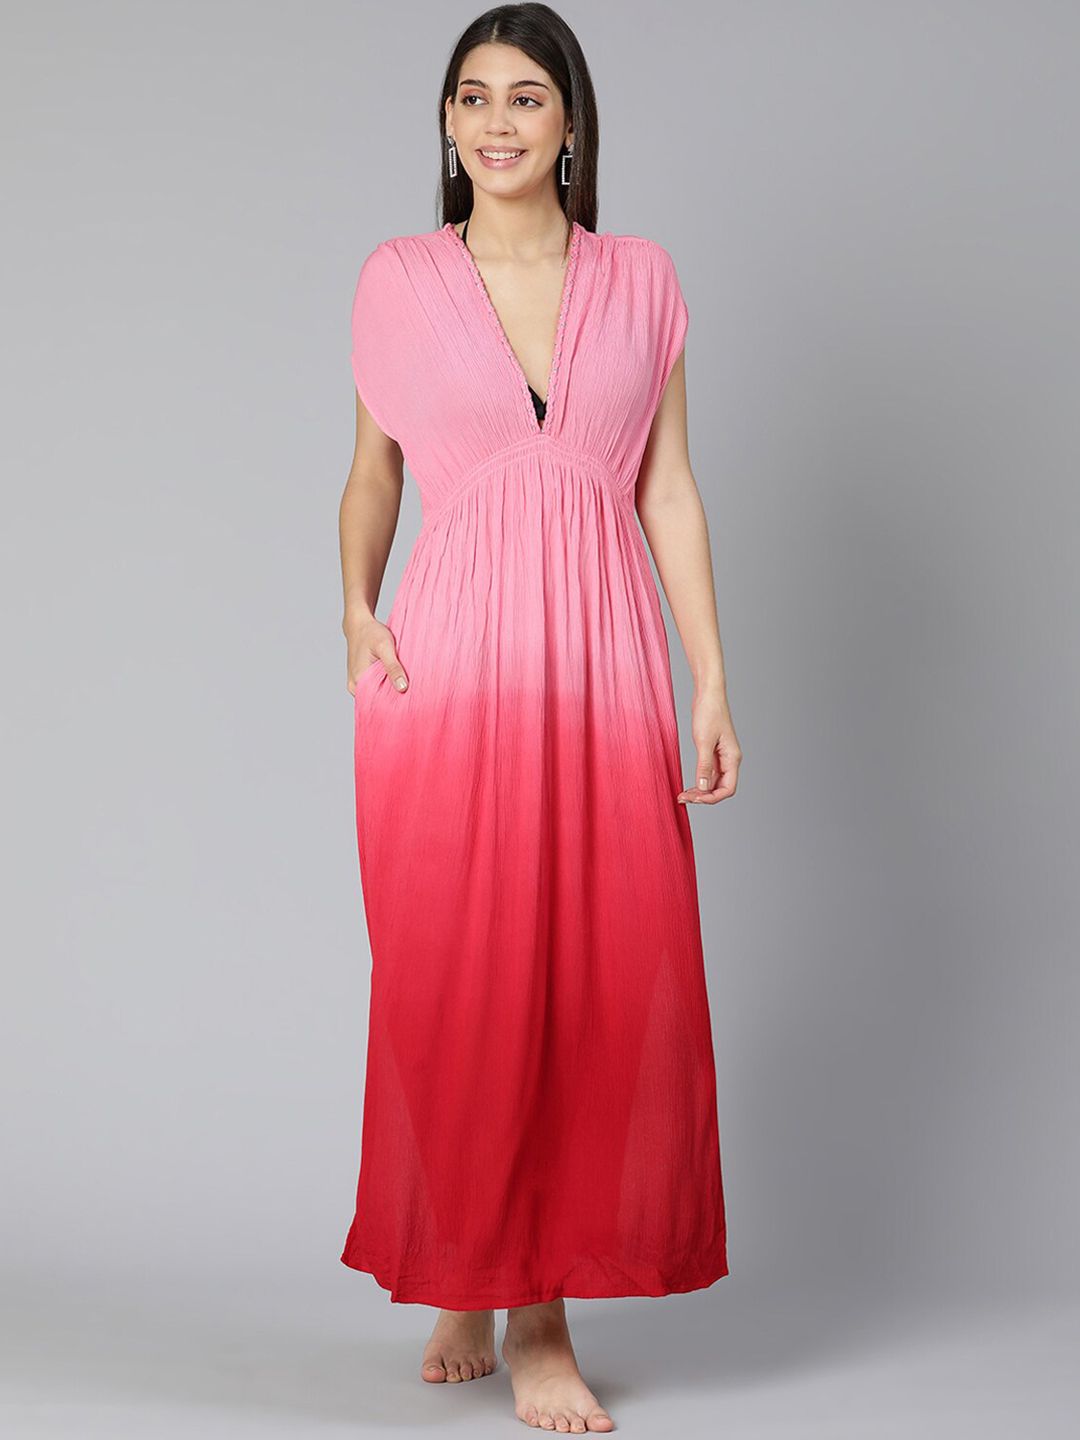 Oxolloxo Women Pink Tie-Dye Cover Up Dress Price in India